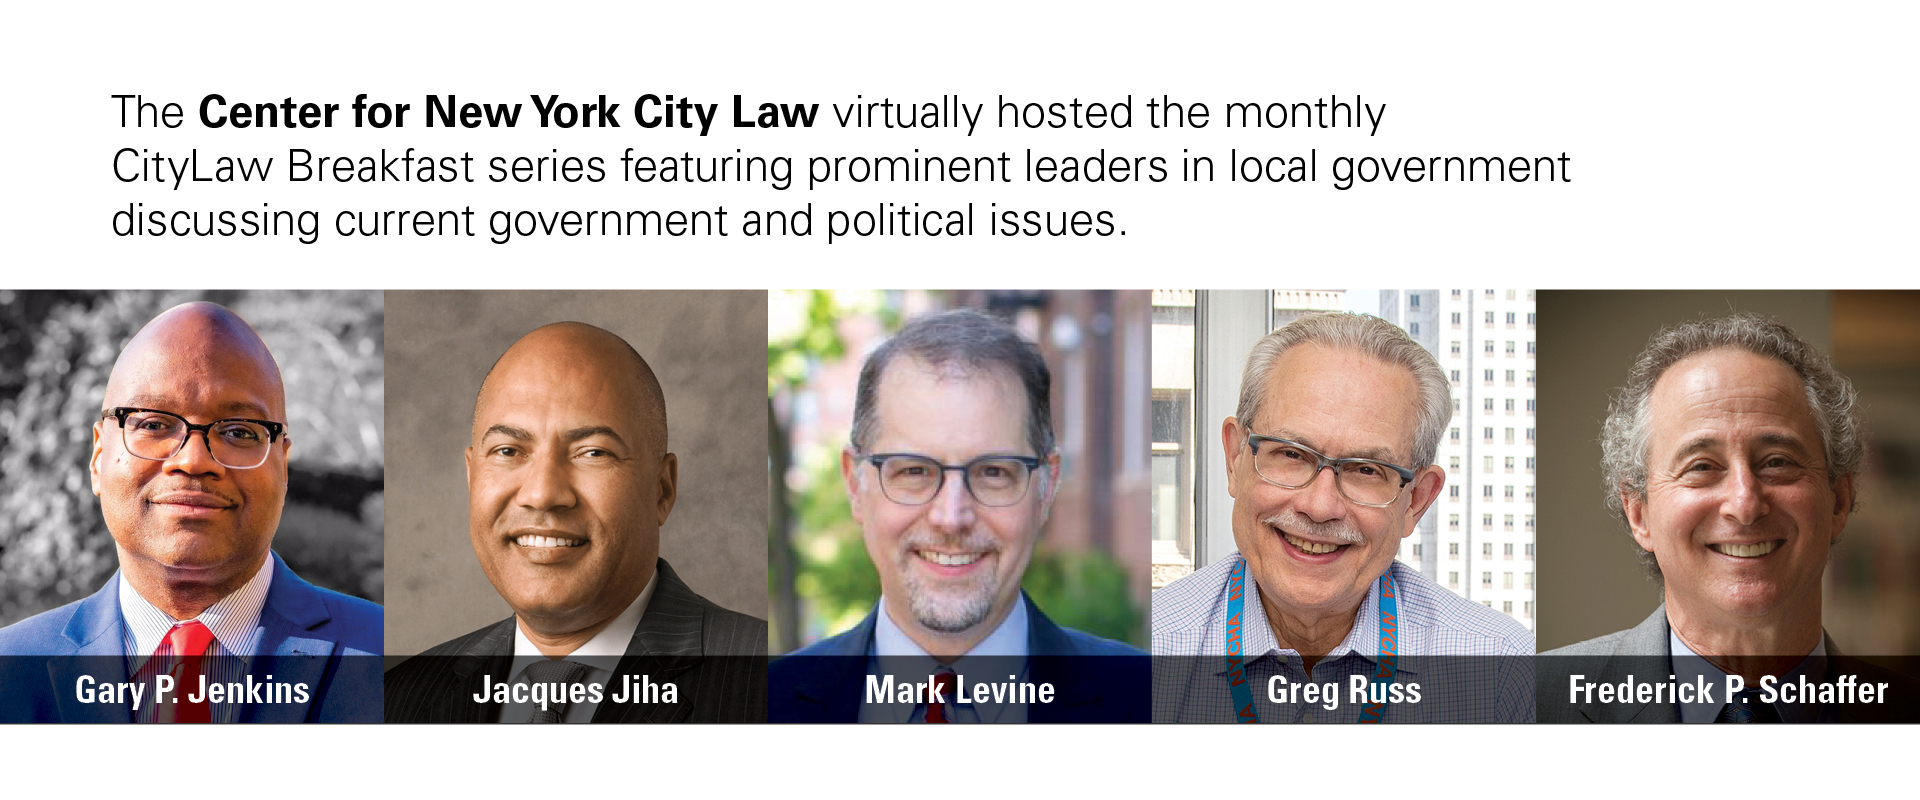 The Center for New York City Law virtually hosted the monthly CityLaw Breakfast series featuring prominent leaders in local government discussing current government and political issues.